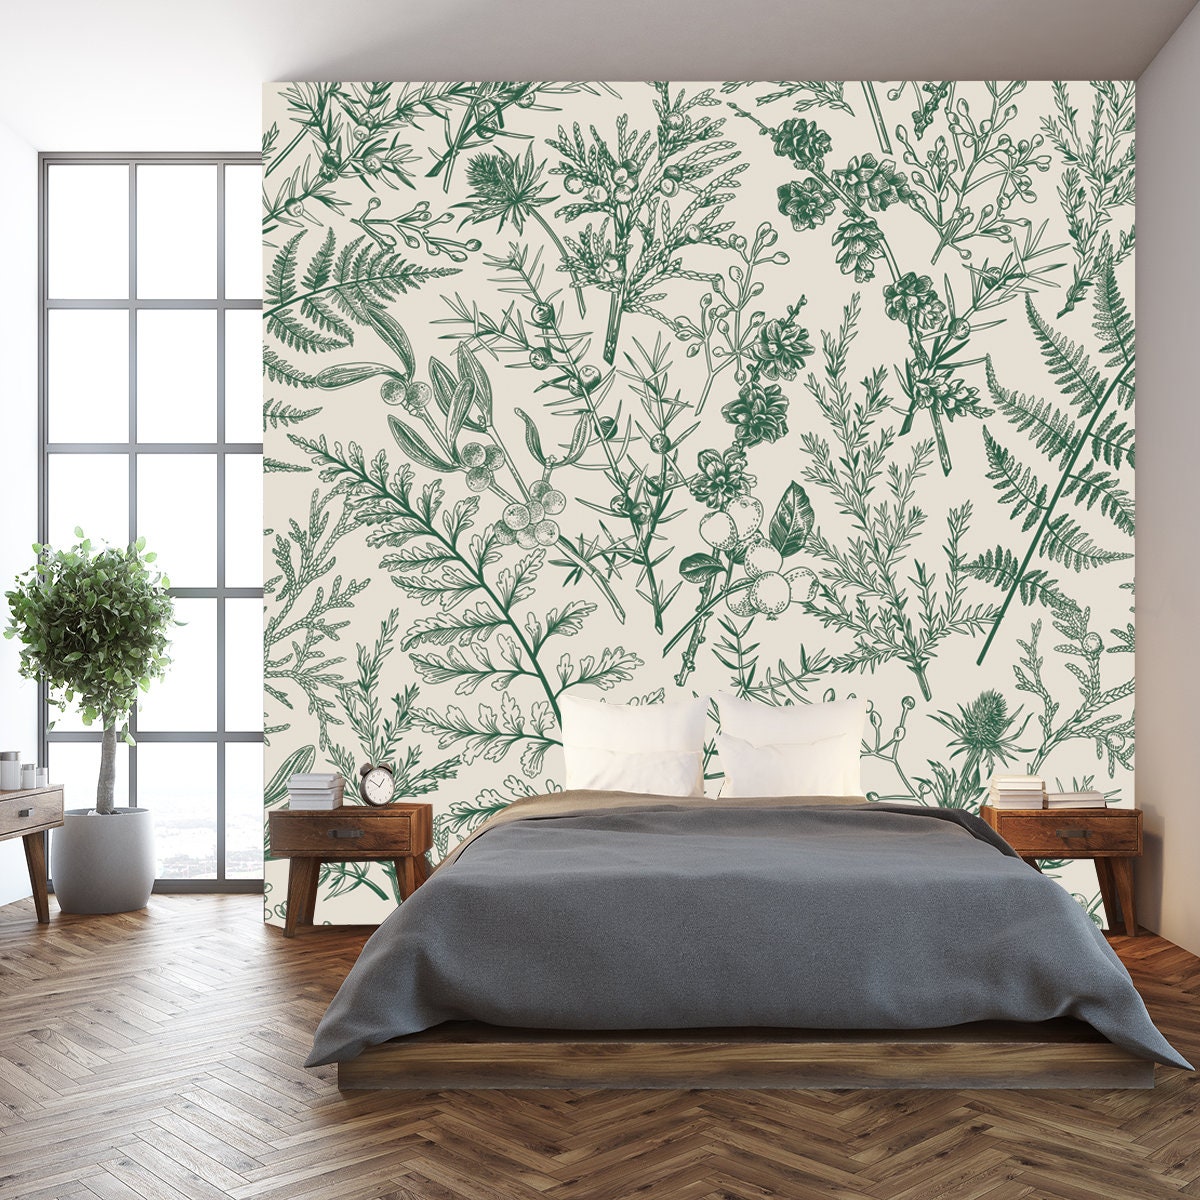 Botanical Seamless Hand-Drawn Pattern with Coniferous Branches, Plants and Berries Wallpaper Bedroom Mural